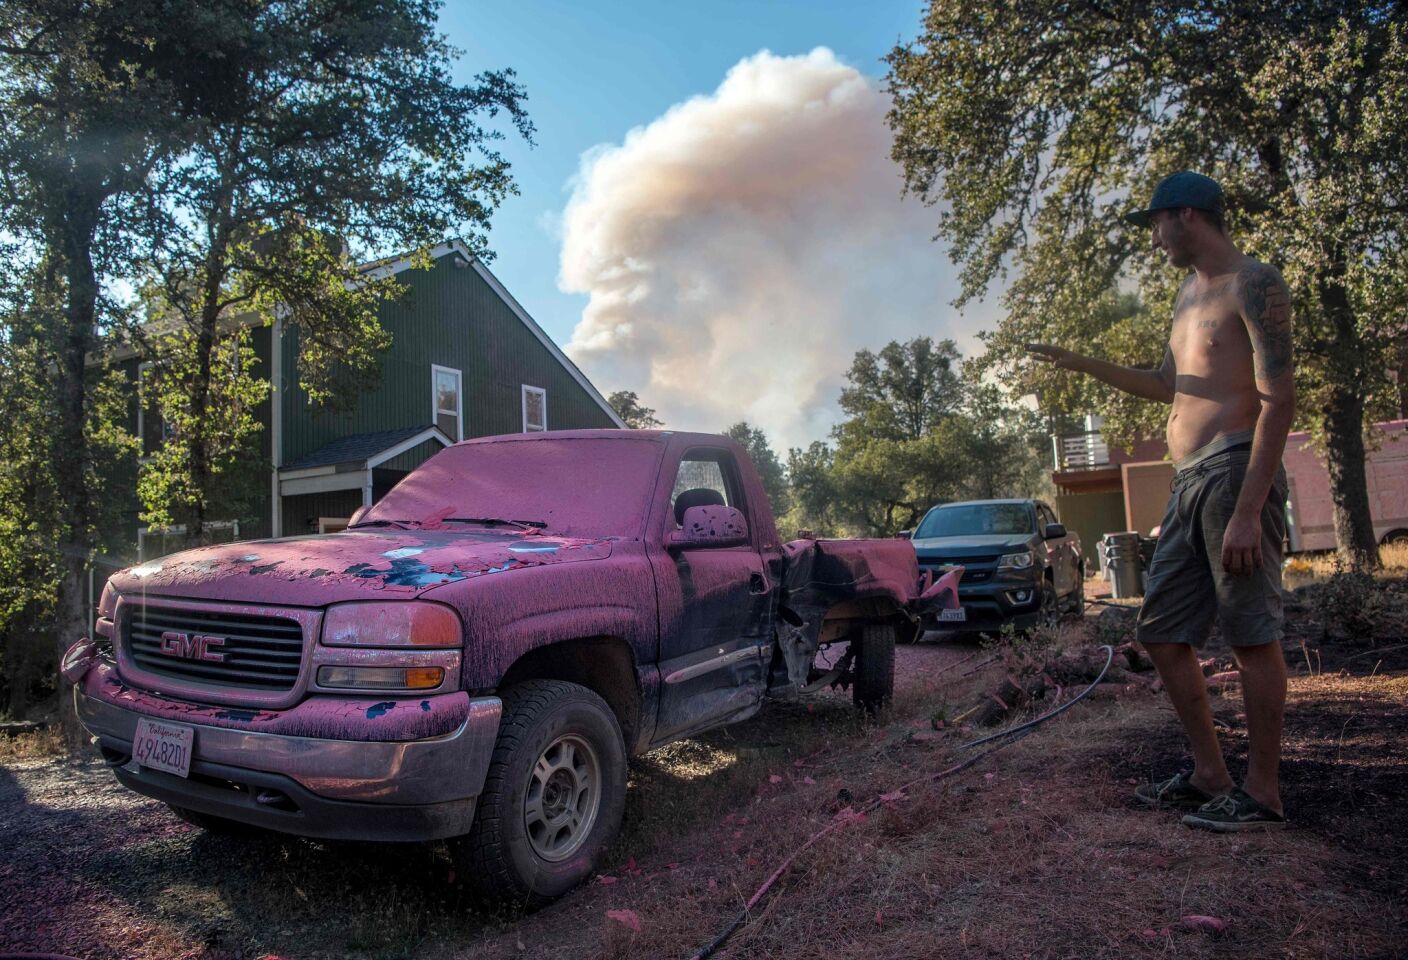 Sean Greenlaw views his truck covered in fire retardant as a smoke plume billows in the background near Oroville.